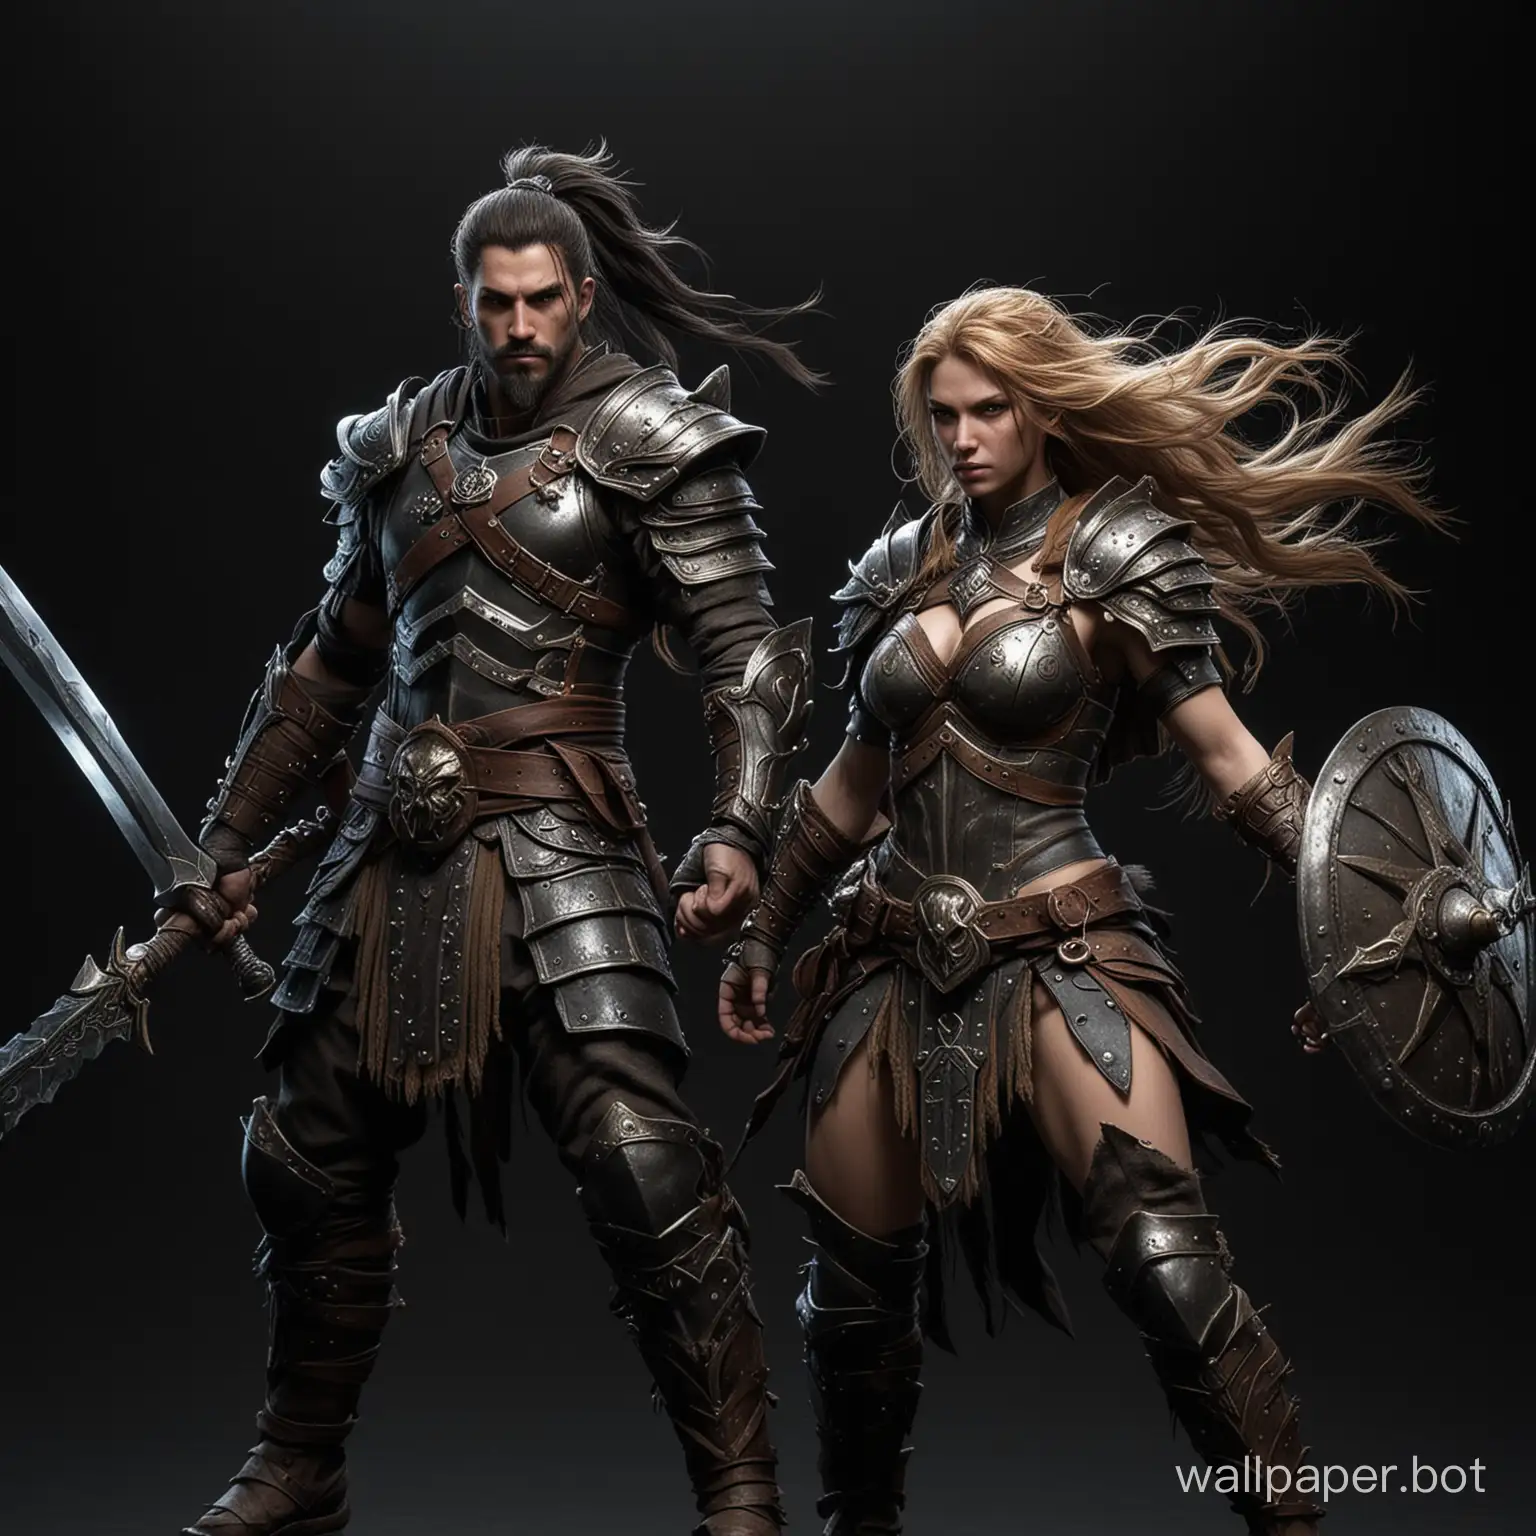 depicts two fantasy warriors against a black background